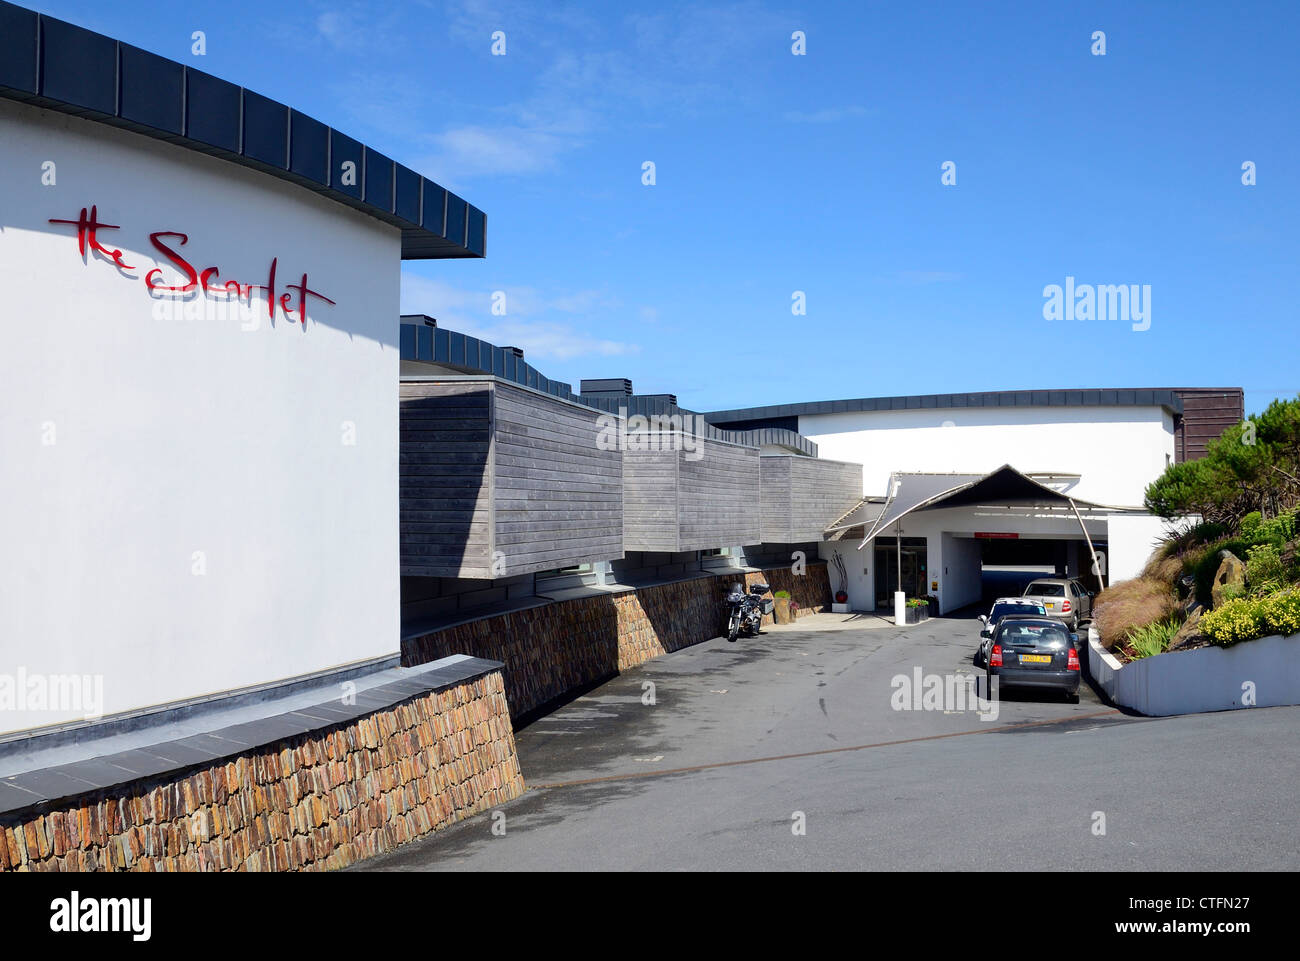 The Scarlet Eco Hotel at Mawgan Porth in Cornwall, England, UK Stock Photo